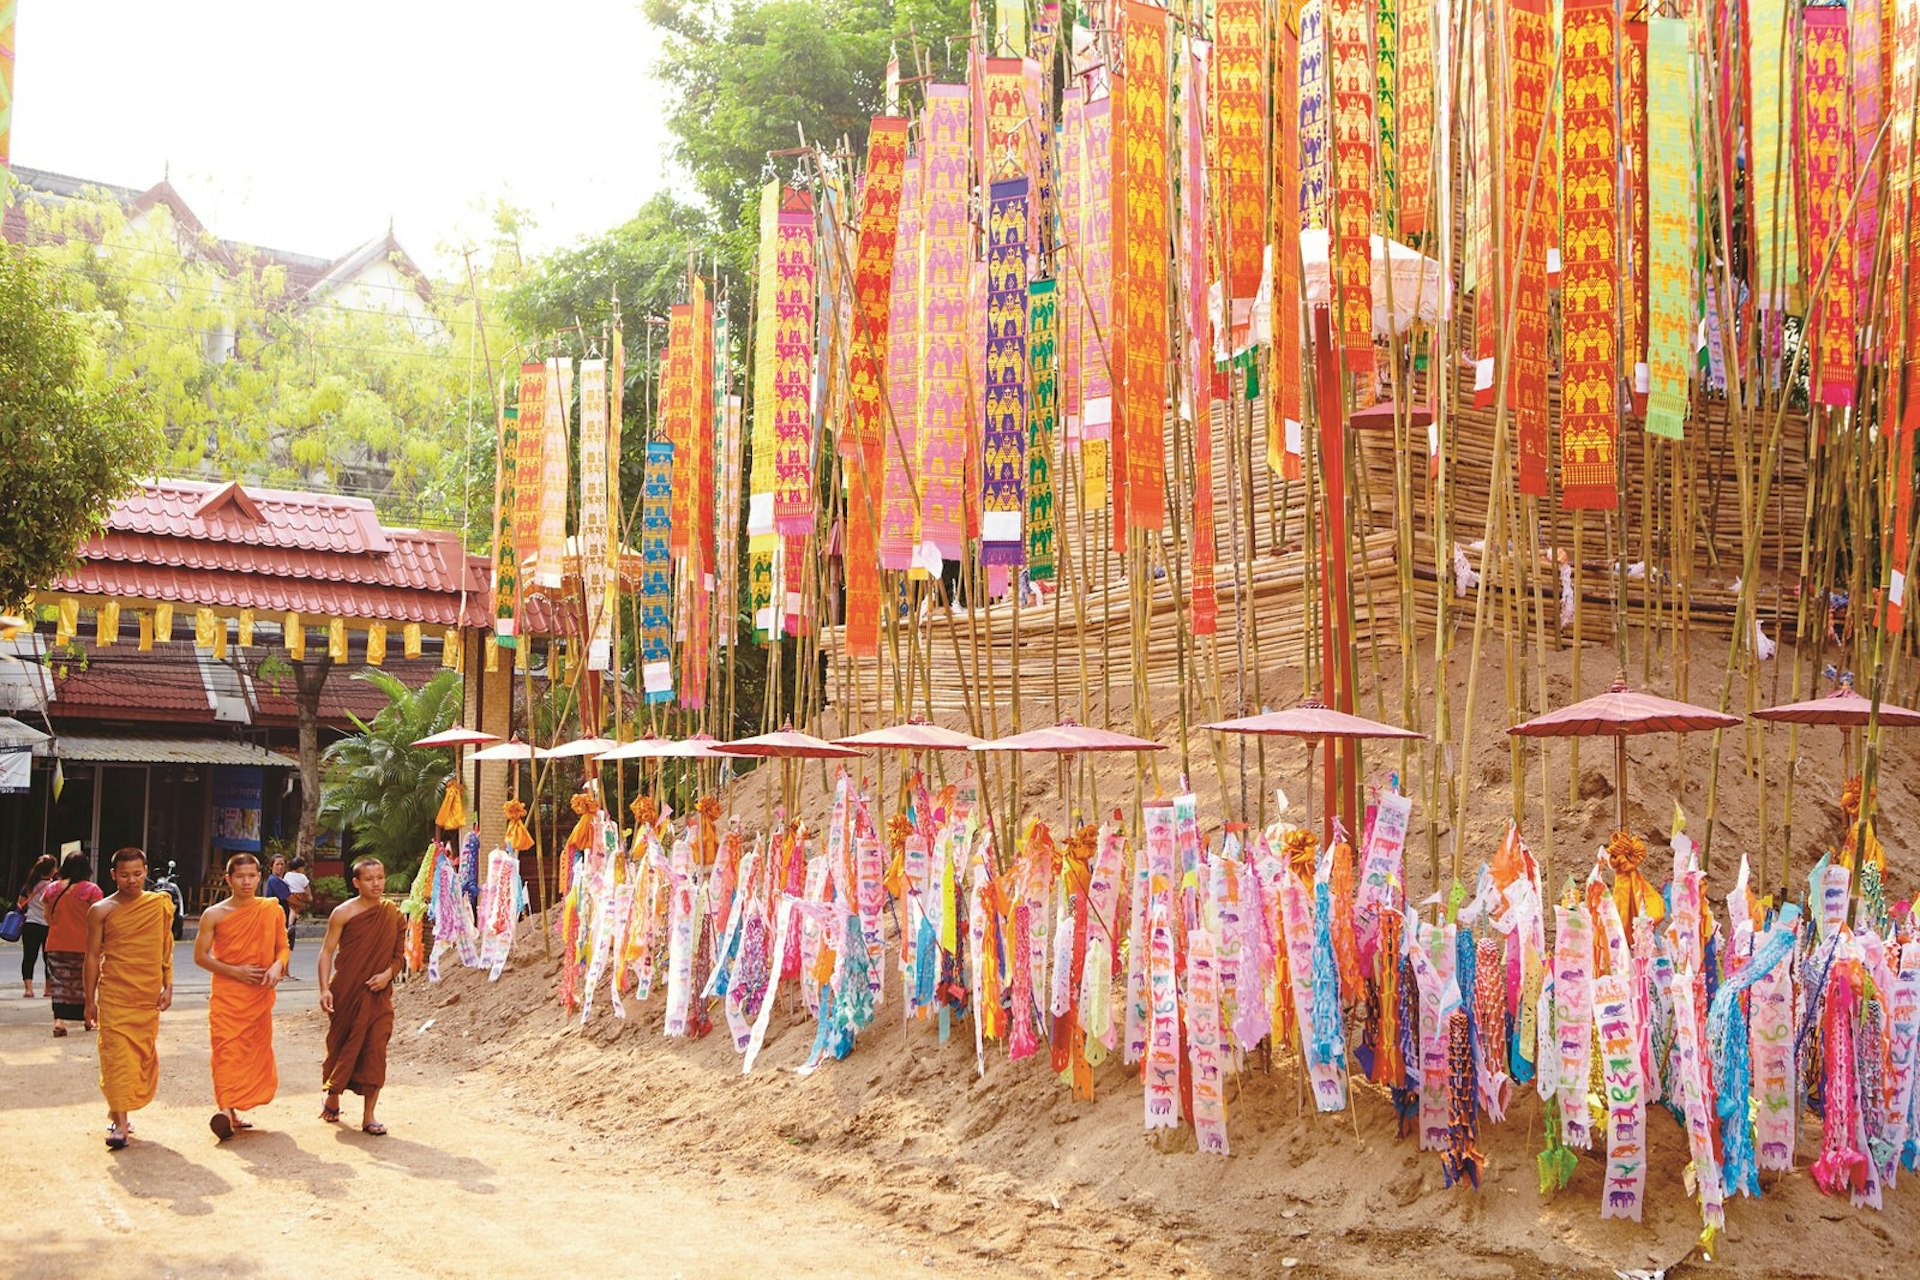 Two monks, wearing bright orange robes, walk past a sand pagoda decorated with colourful prayer flags in Chiang Mai